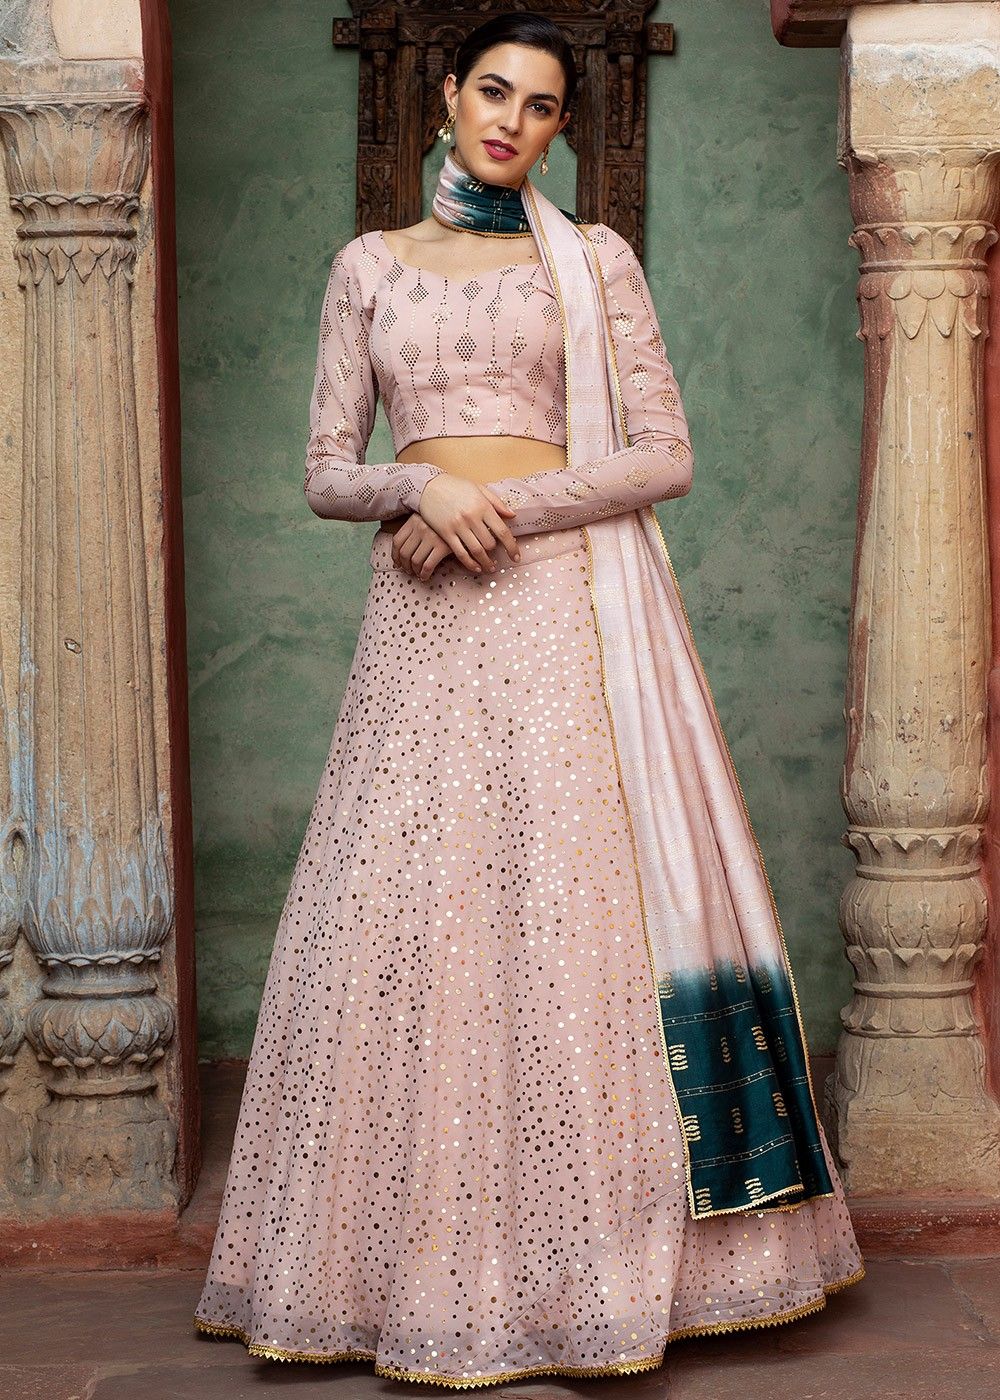 DUSTY PEACH LEHENGA SET WITH ALL OVER SILVER PATTERNED EMBROIDERY PAIRED  WITH A MATCHING DUPATTA AND TASSELS. - Seasons India